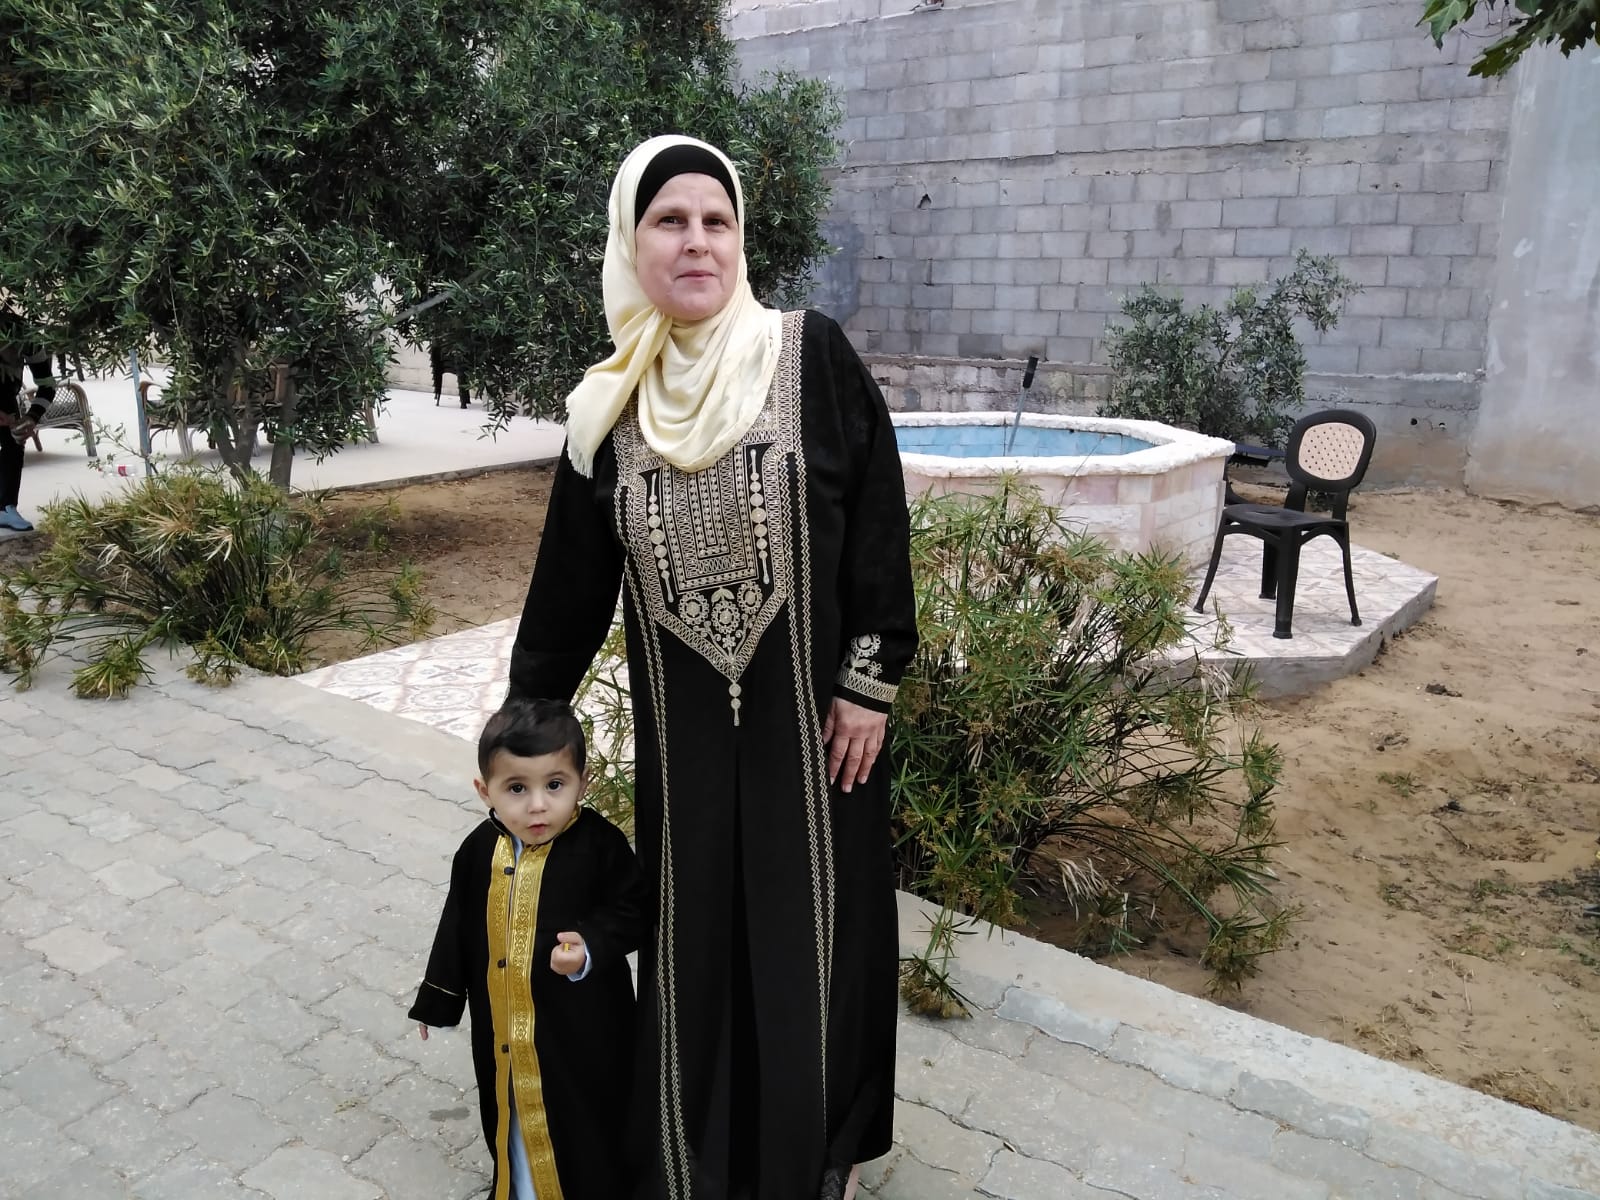 A family photo of Hala with her grandson, Tayem, who is now 5-years-old. They were holding hands when she was shot.